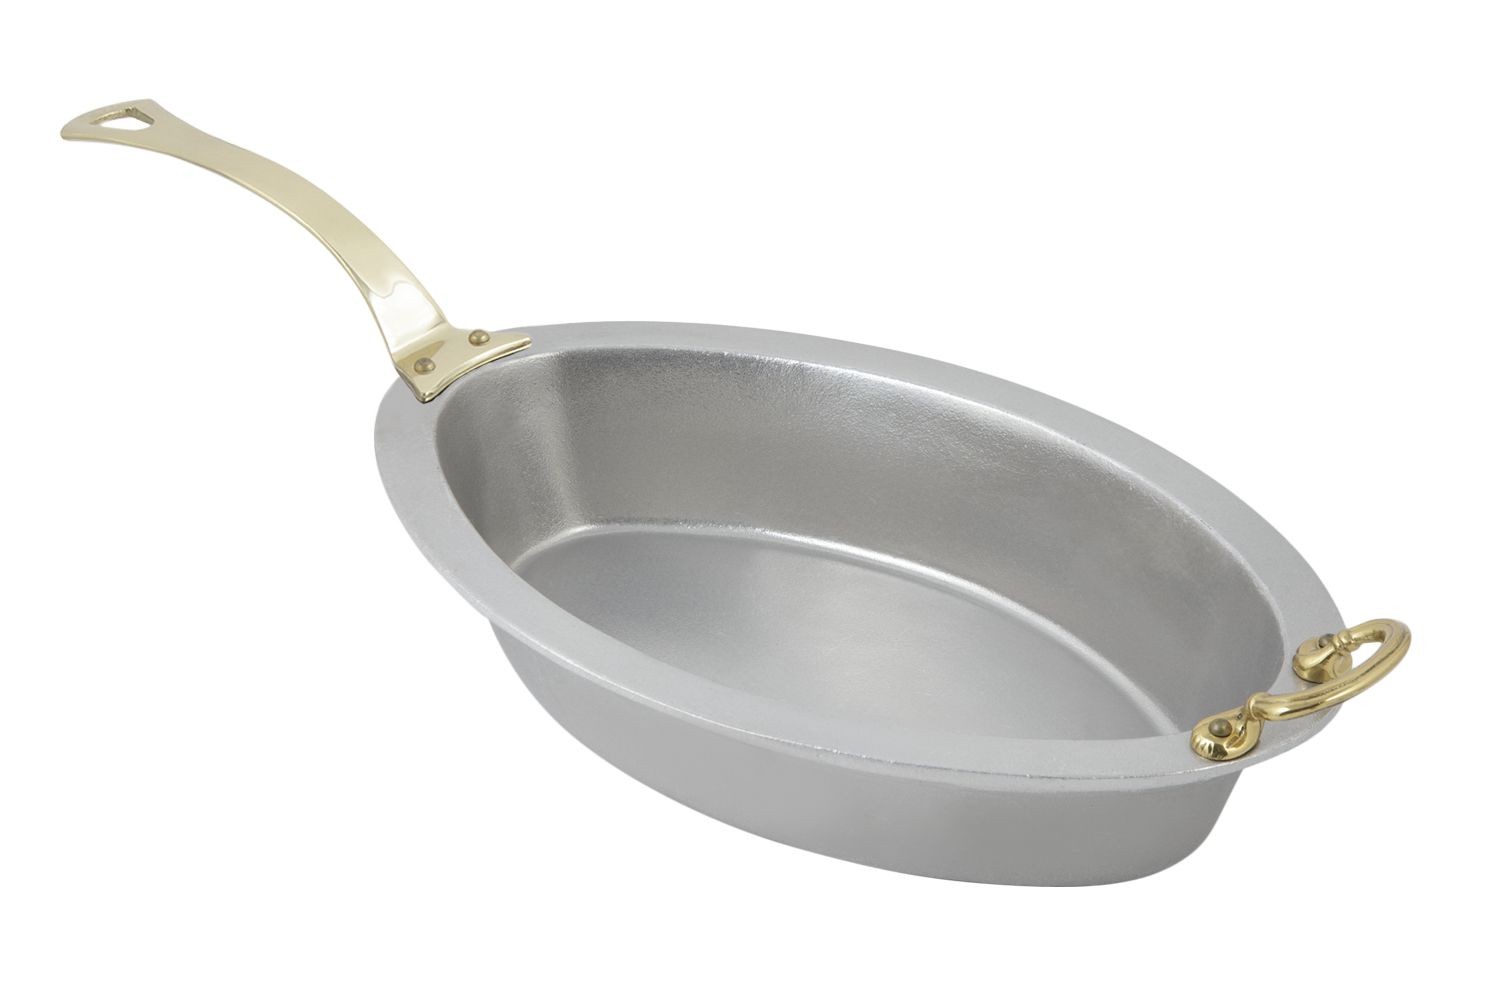 Bon Chef 5099HLP Oval Casserole Dish with Long Brass Handle, Pewter Glo 7 Qt.